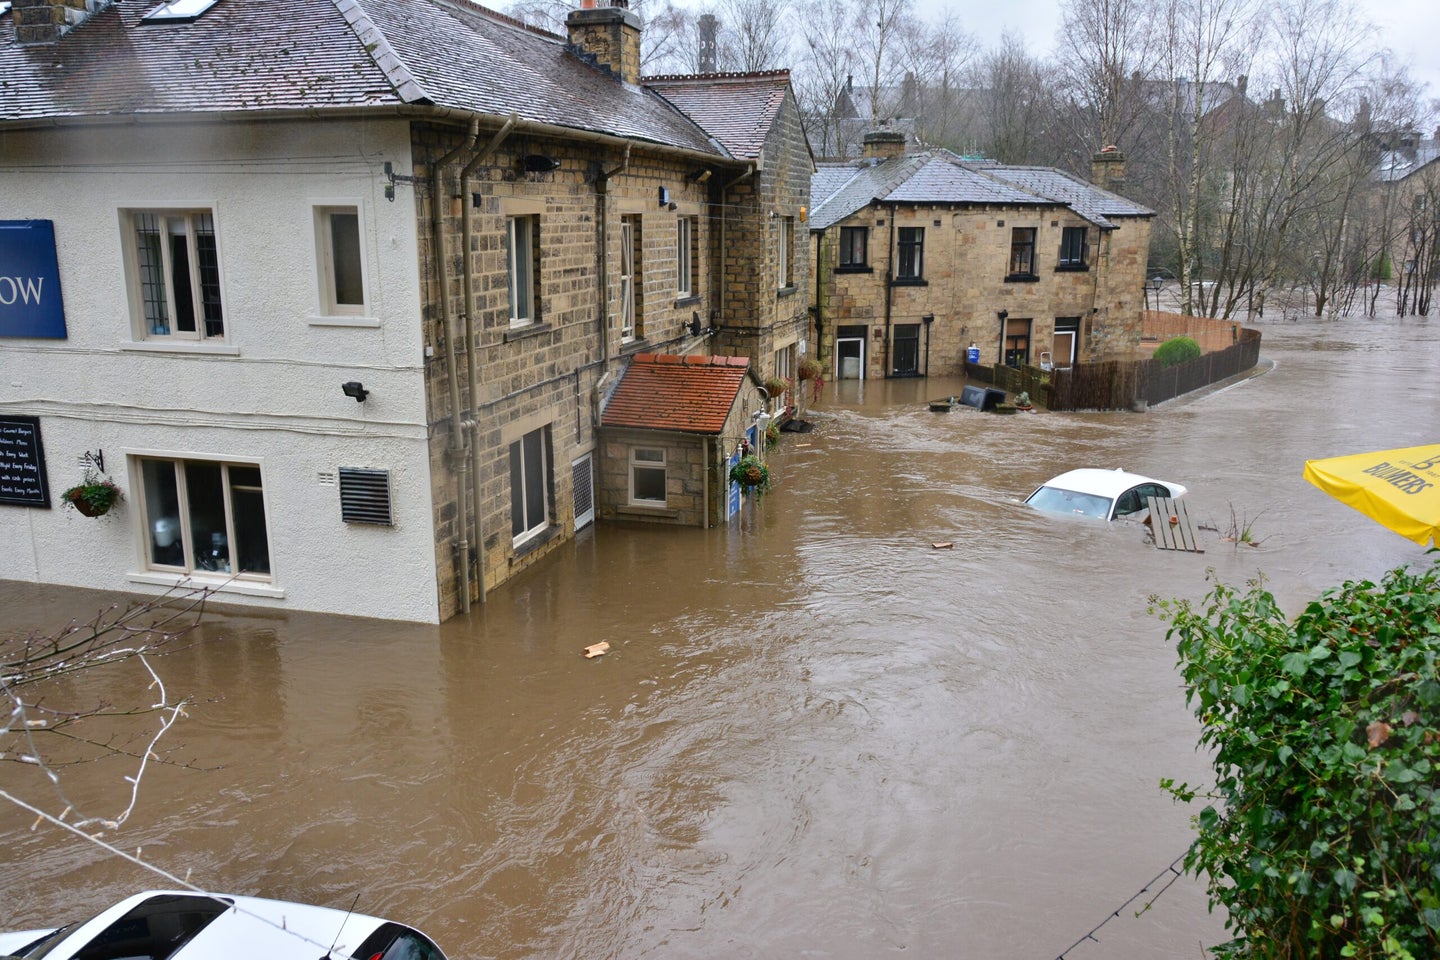 Flooded buildings and cars in neighborhood.